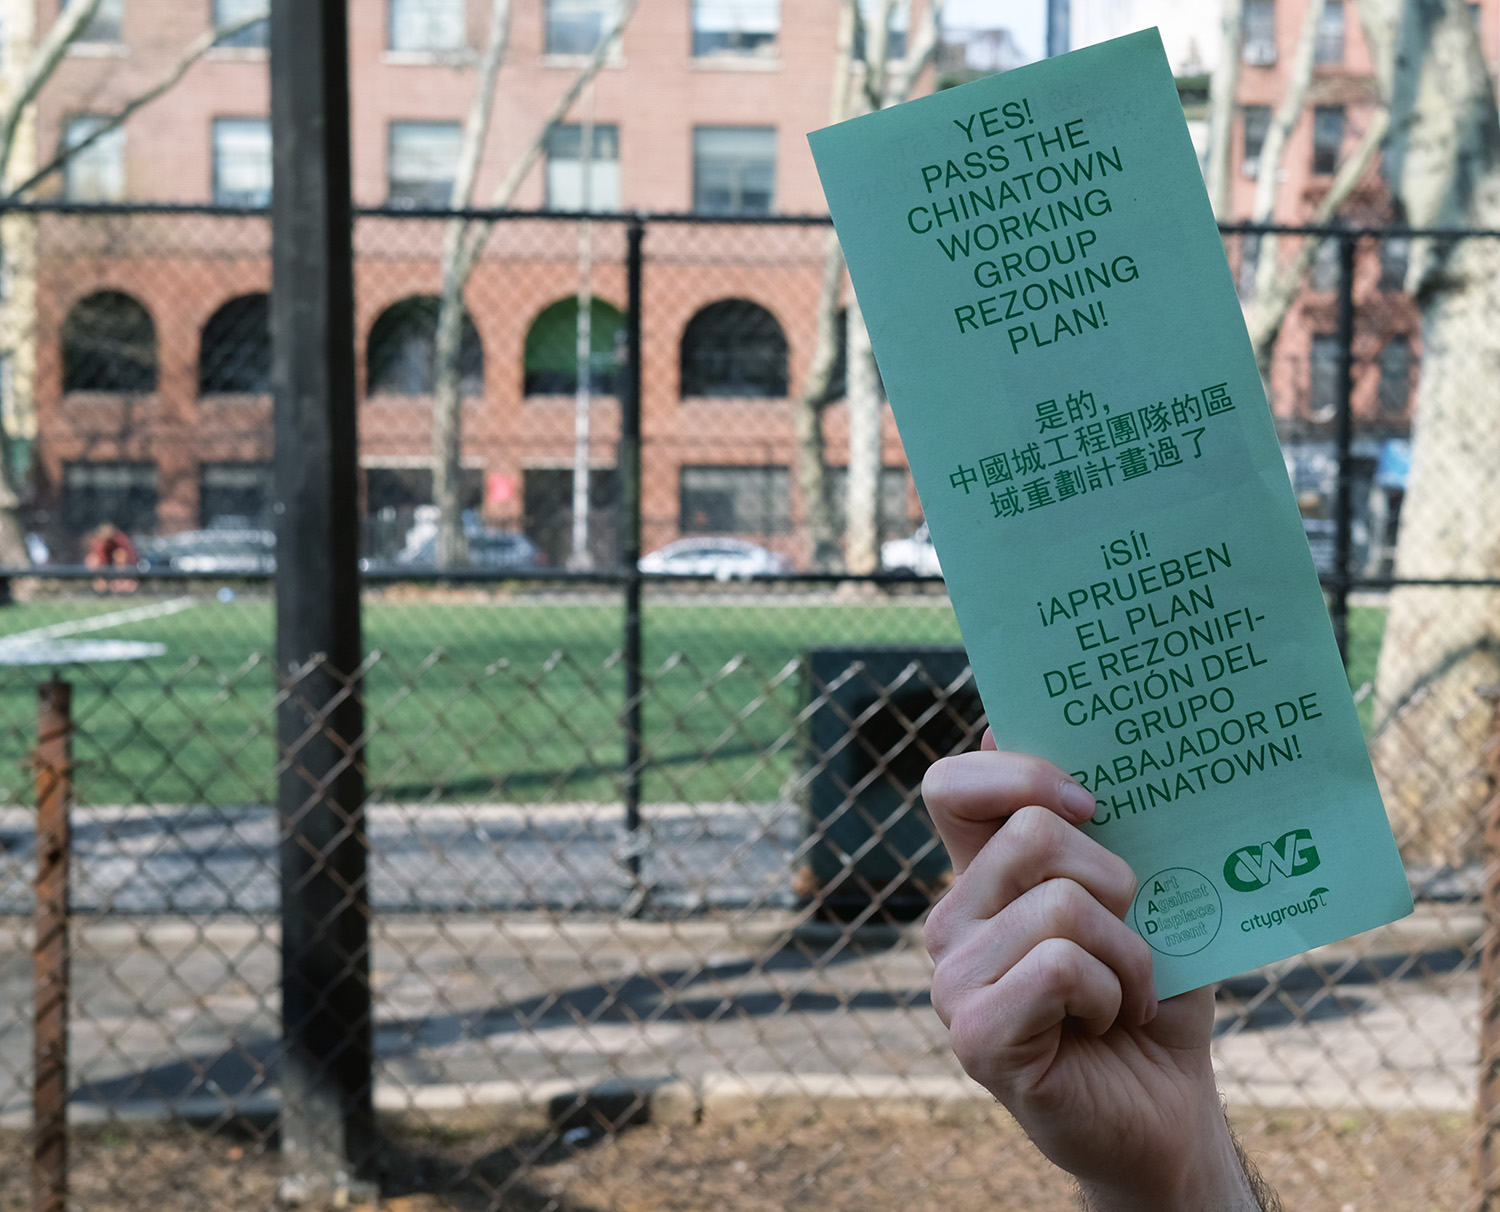 Hand holding a green flyer with text in English, Spanish, and Chinese that reads: Yes! Pass the Chinatown Working Group Rezoning Plan!